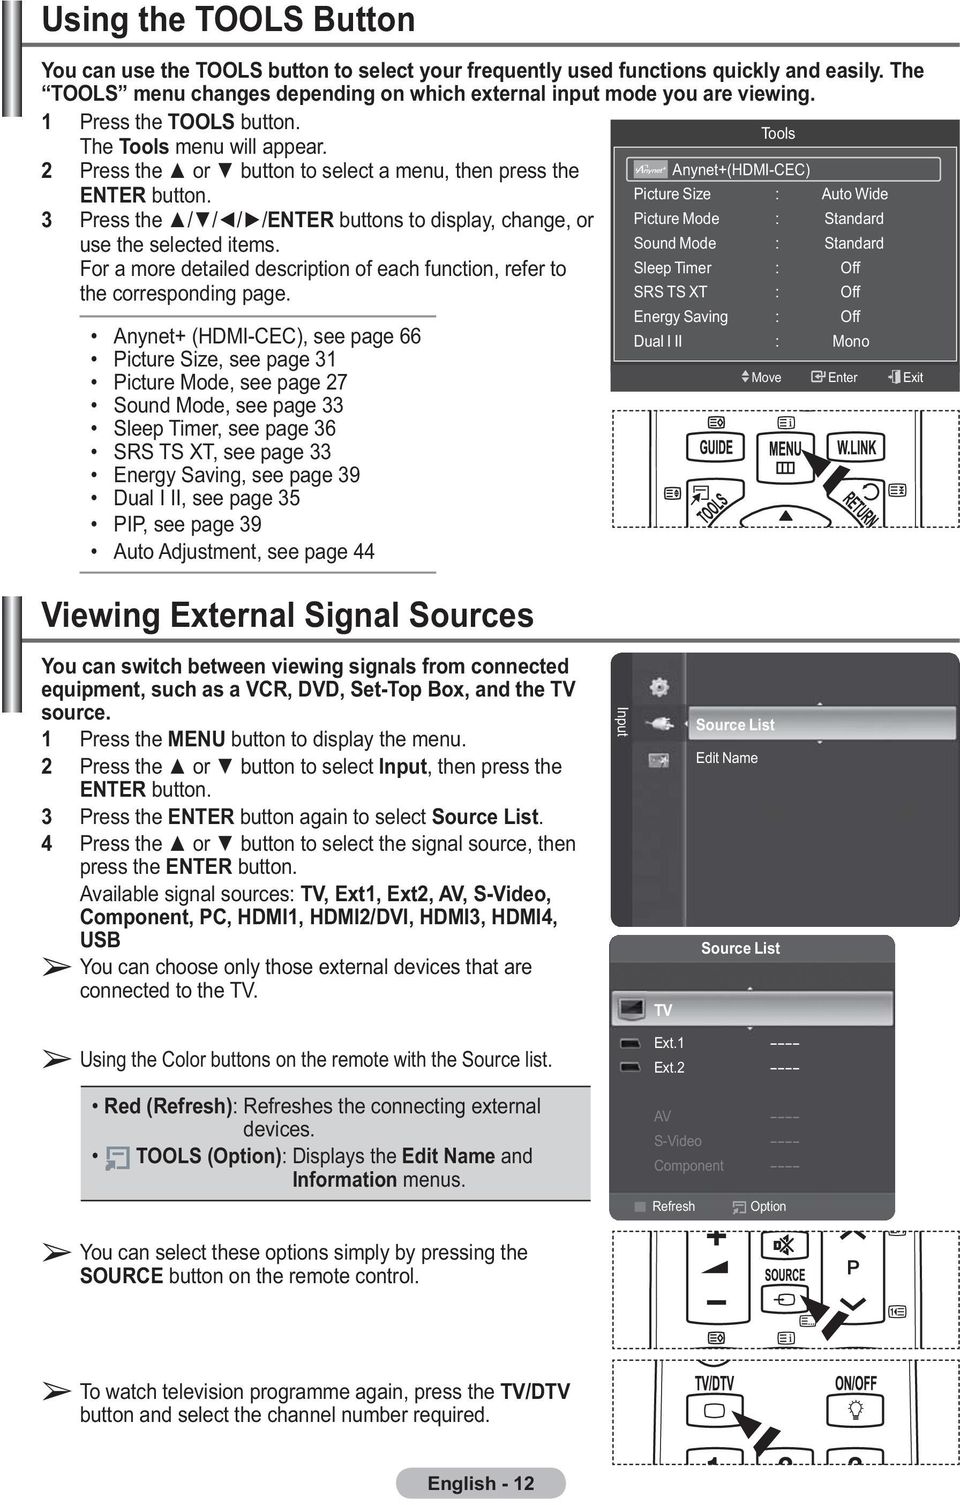 Picture Size : Auto Wide 3 Press the / / / /ENTER buttons to display, change, or use the selected items. For a more detailed description of each function, refer to the corresponding page.